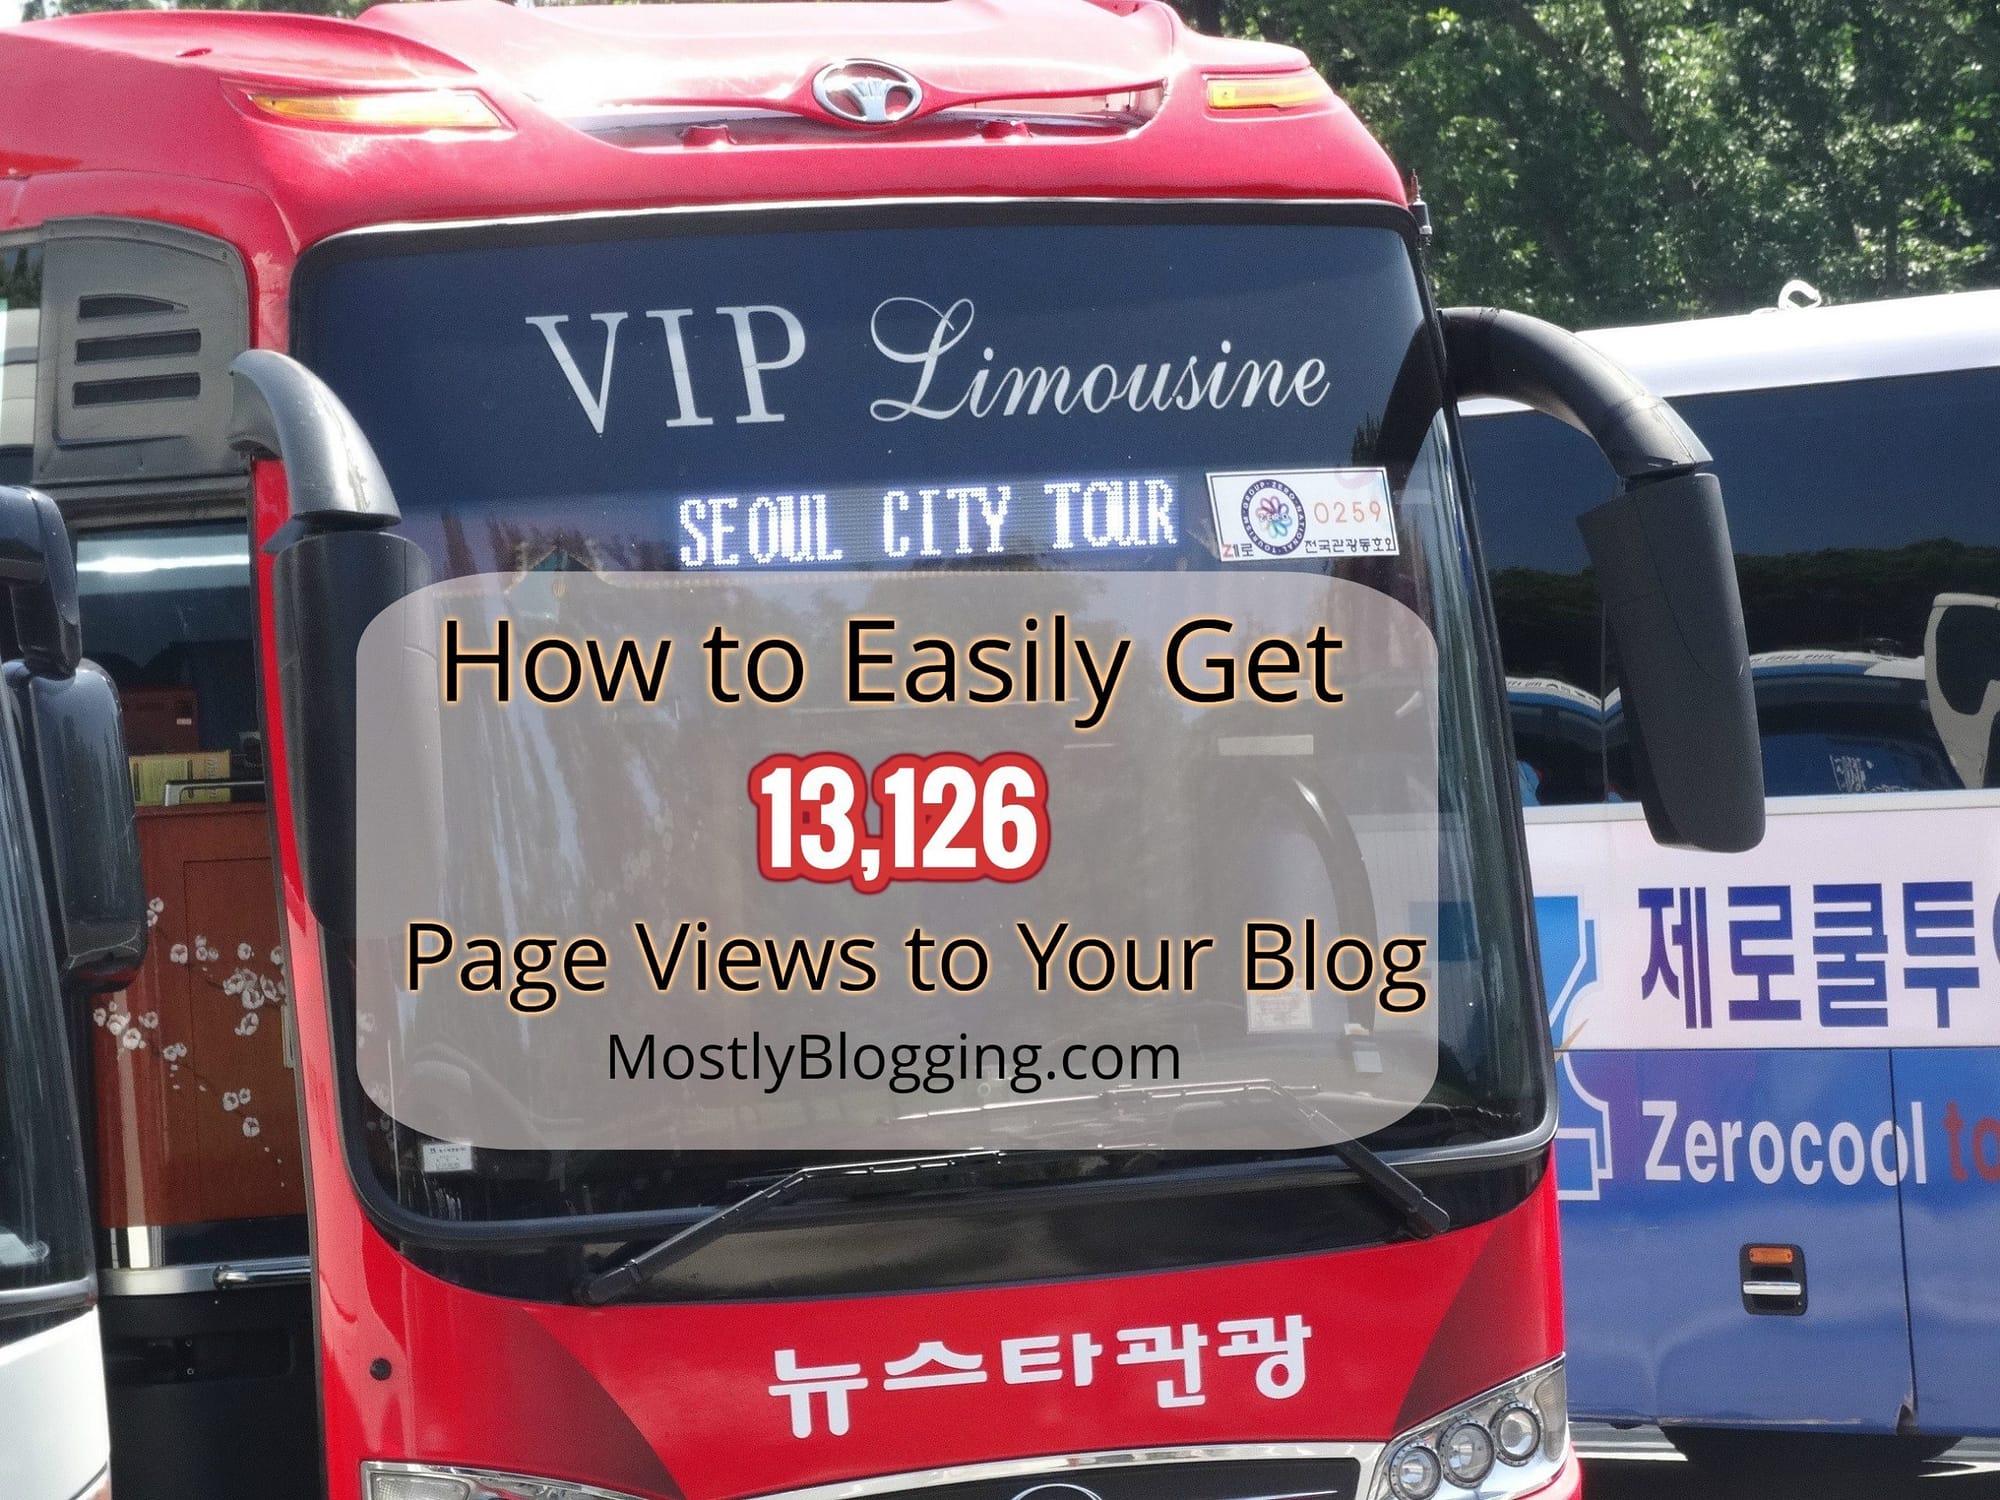 #Bloggers can get high page views by following these #BloggingTips.